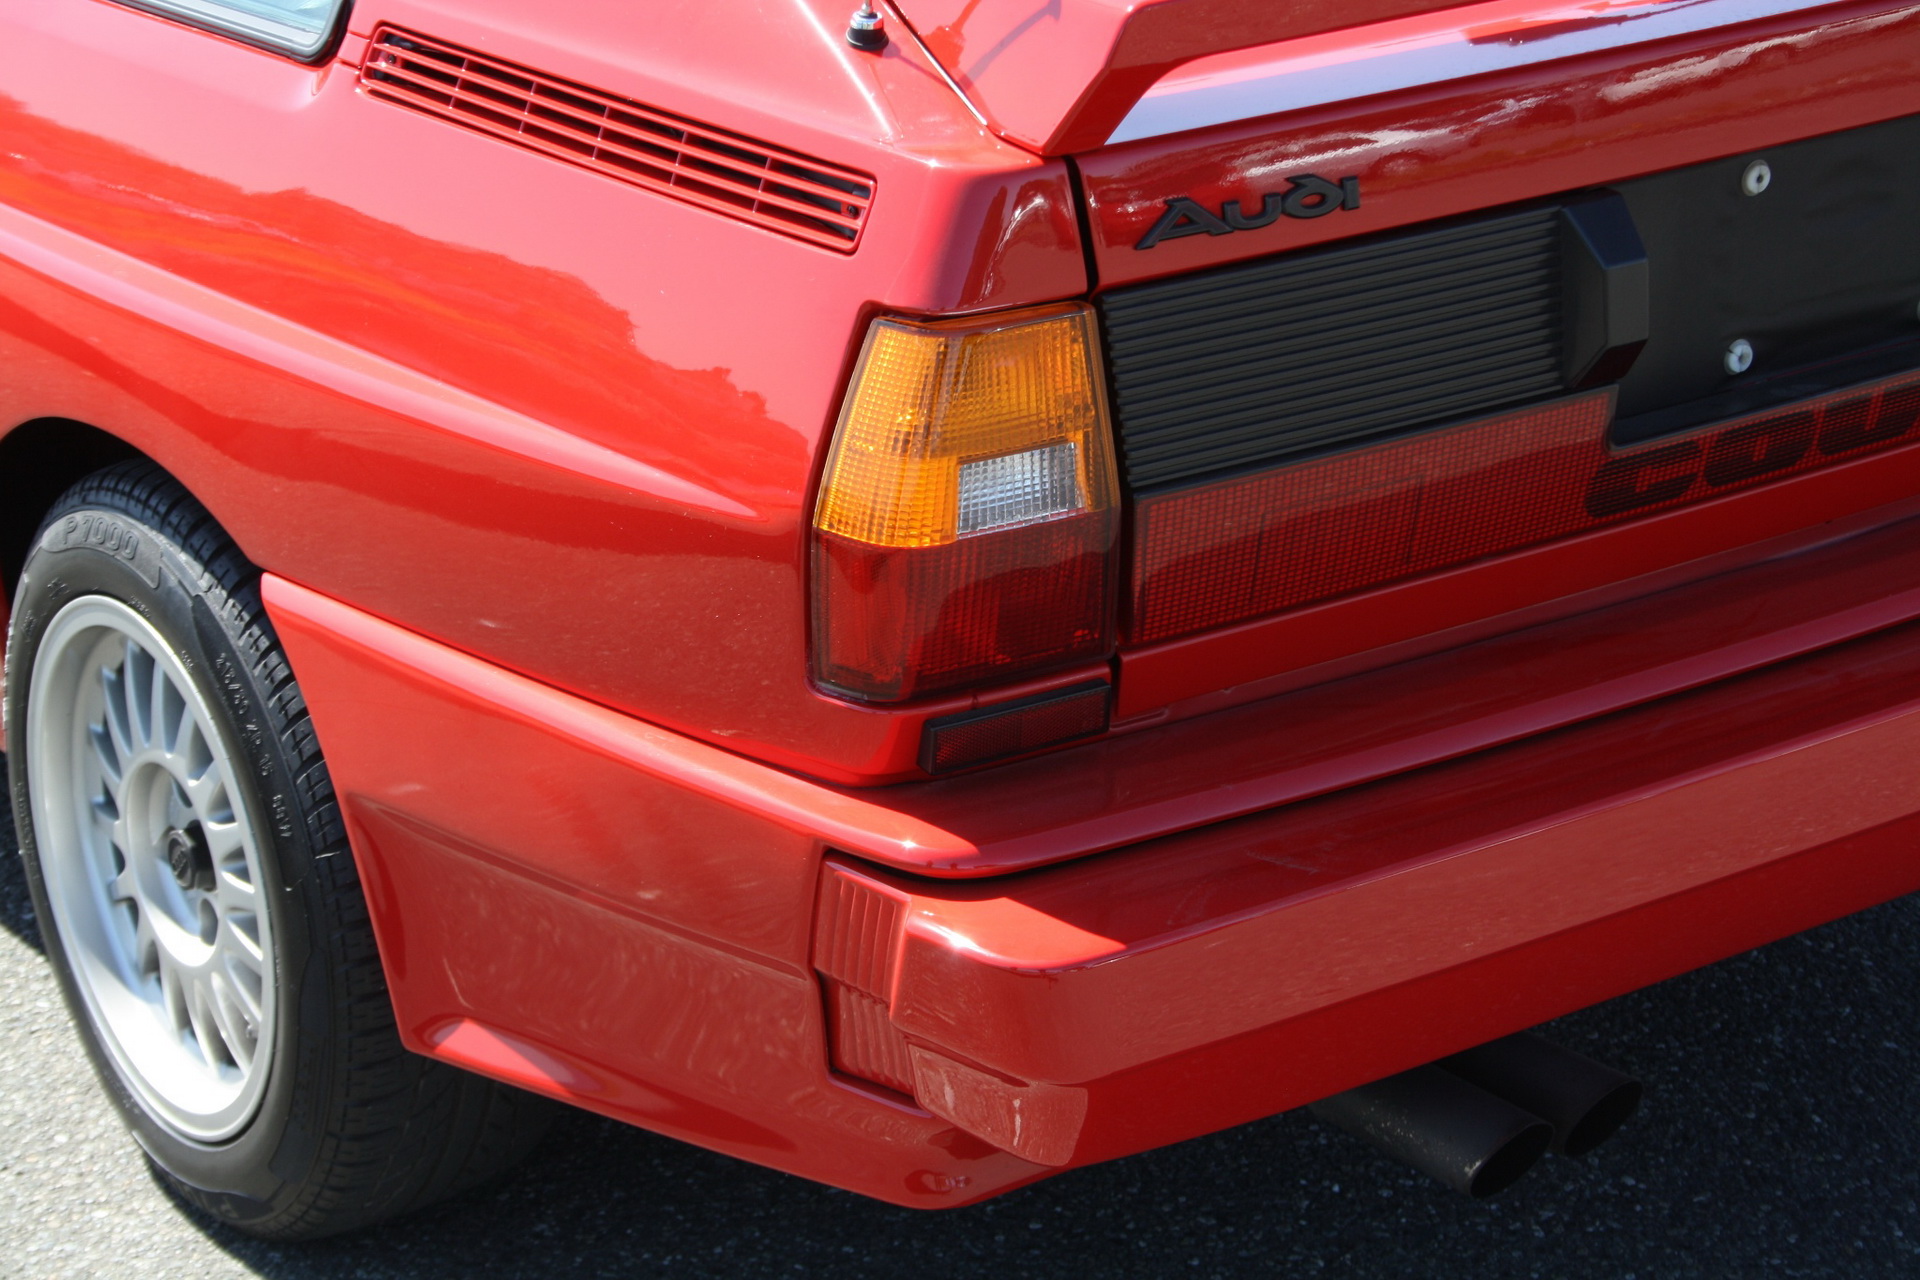 Bid On This 1985 Audi Quattro And Fulfill Your Childhood Rally Dreams ...